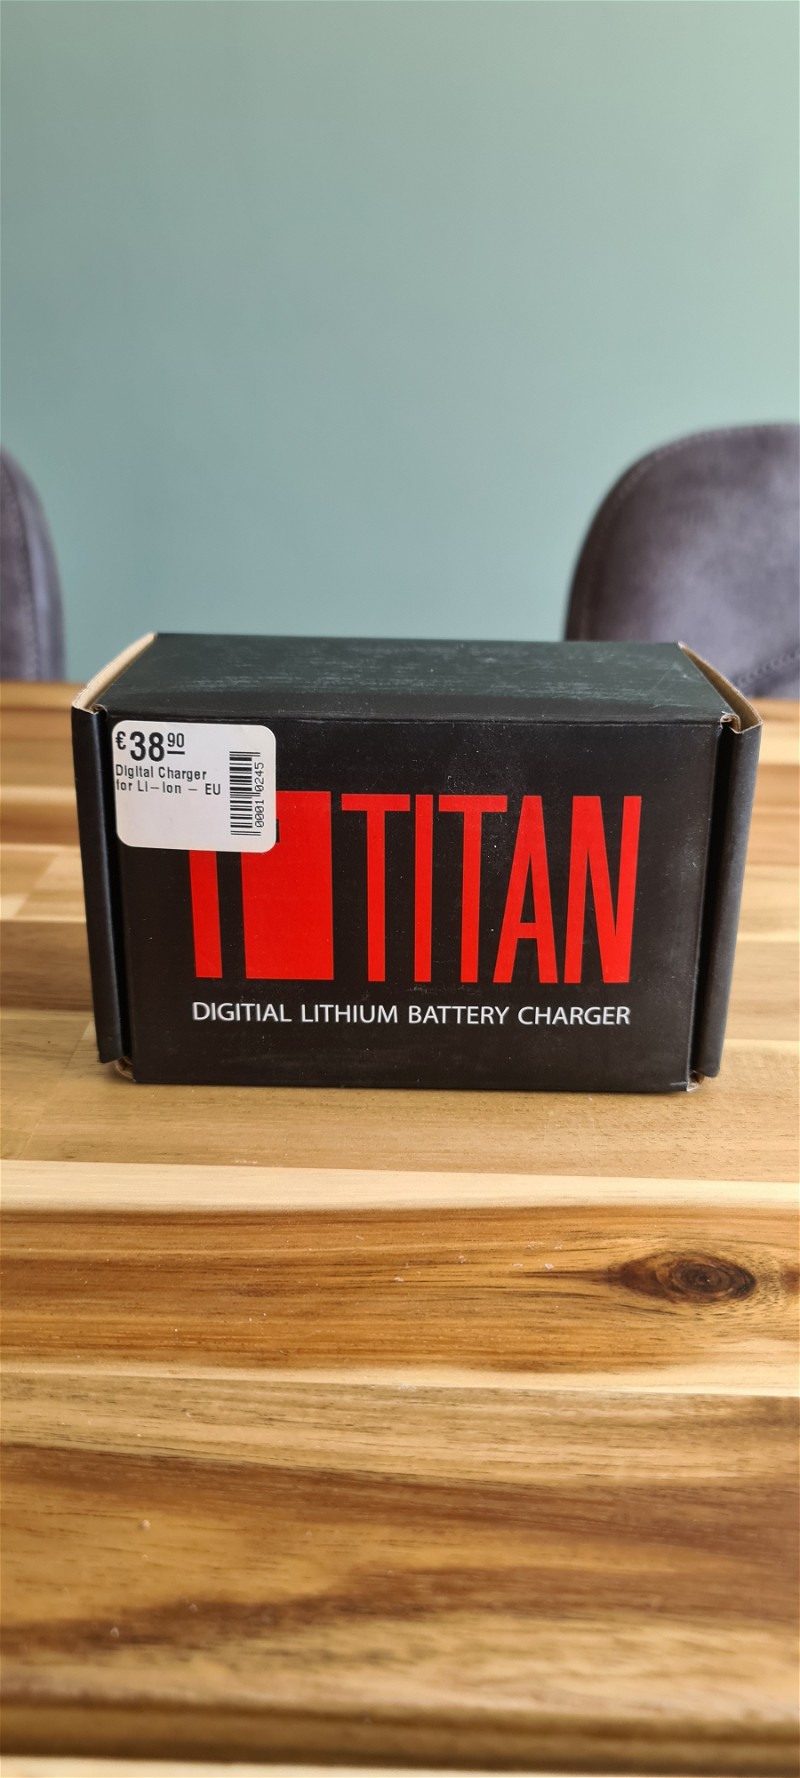 Image 1 for TITAN DIGITAL LITHIUM BATTERY CHARGER